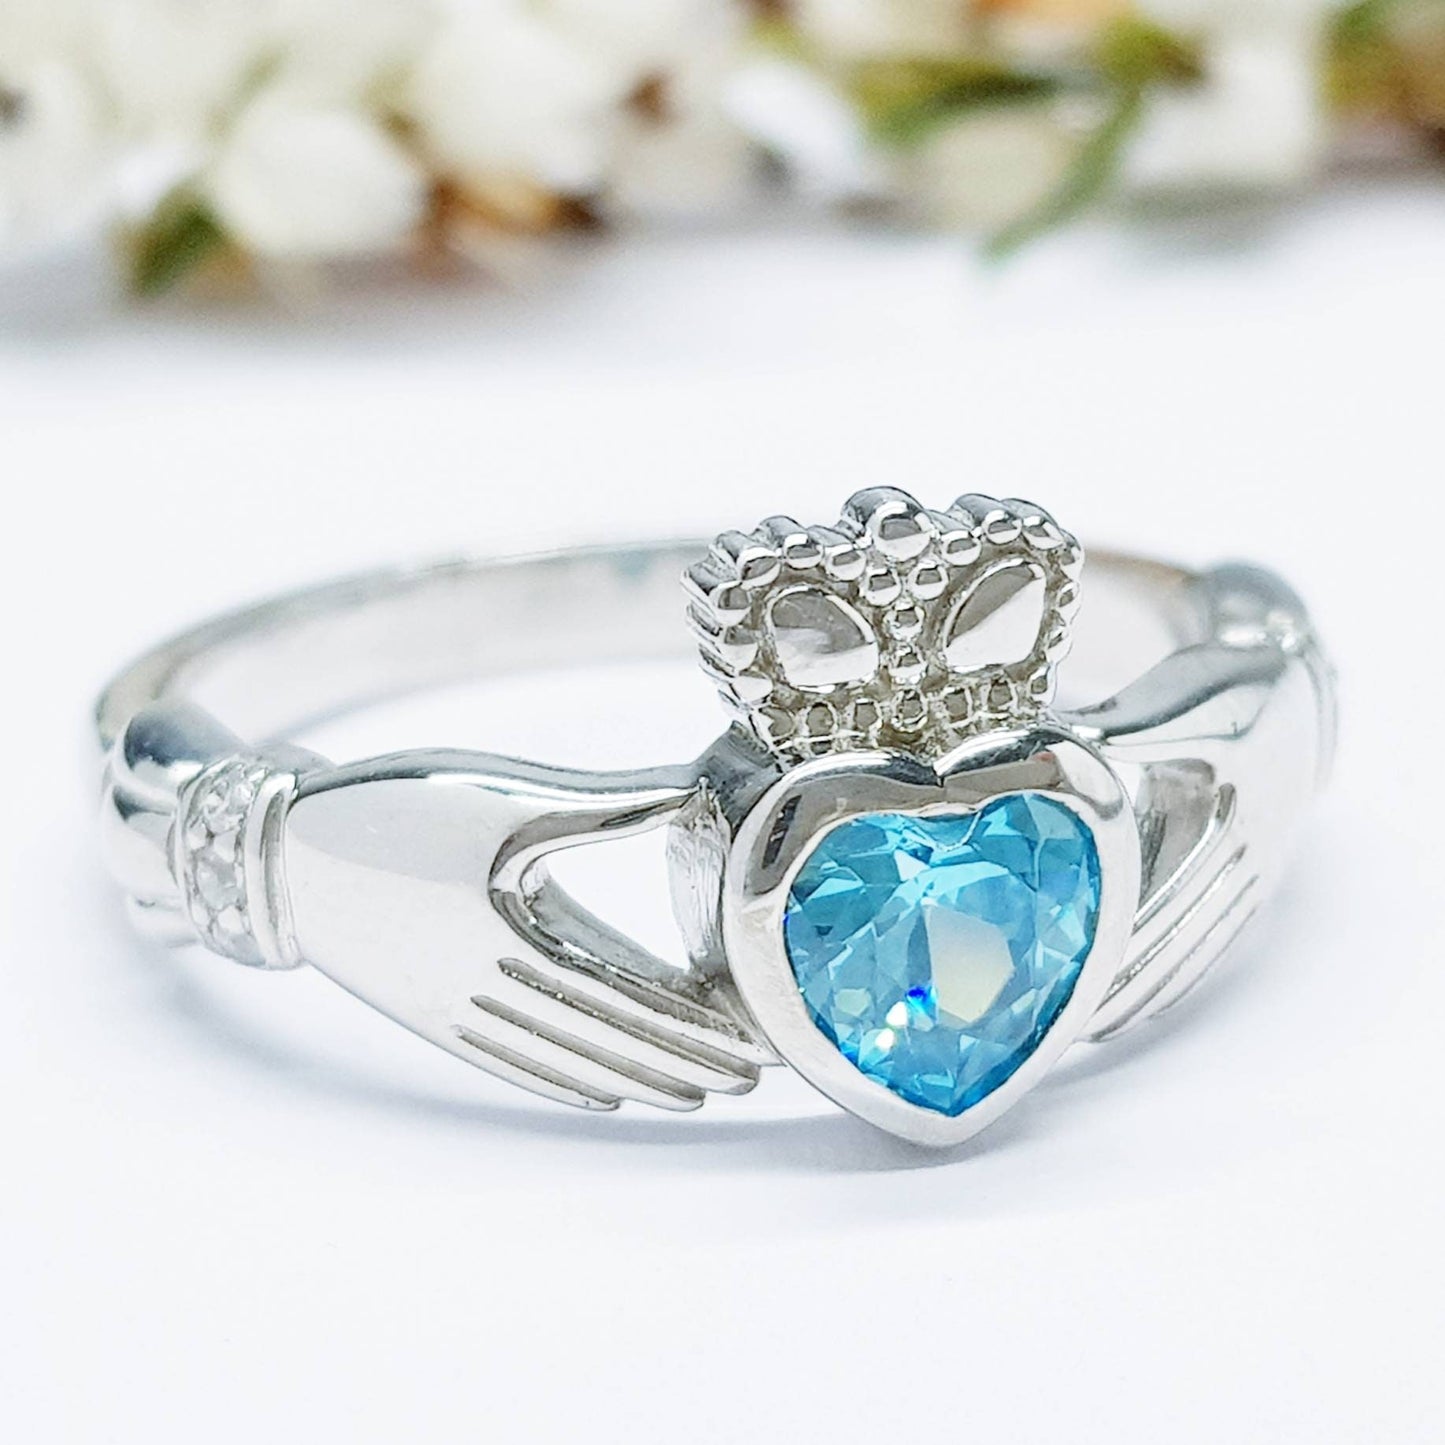 Sterling Silver Claddagh ring set with turquoise heart shaped stone